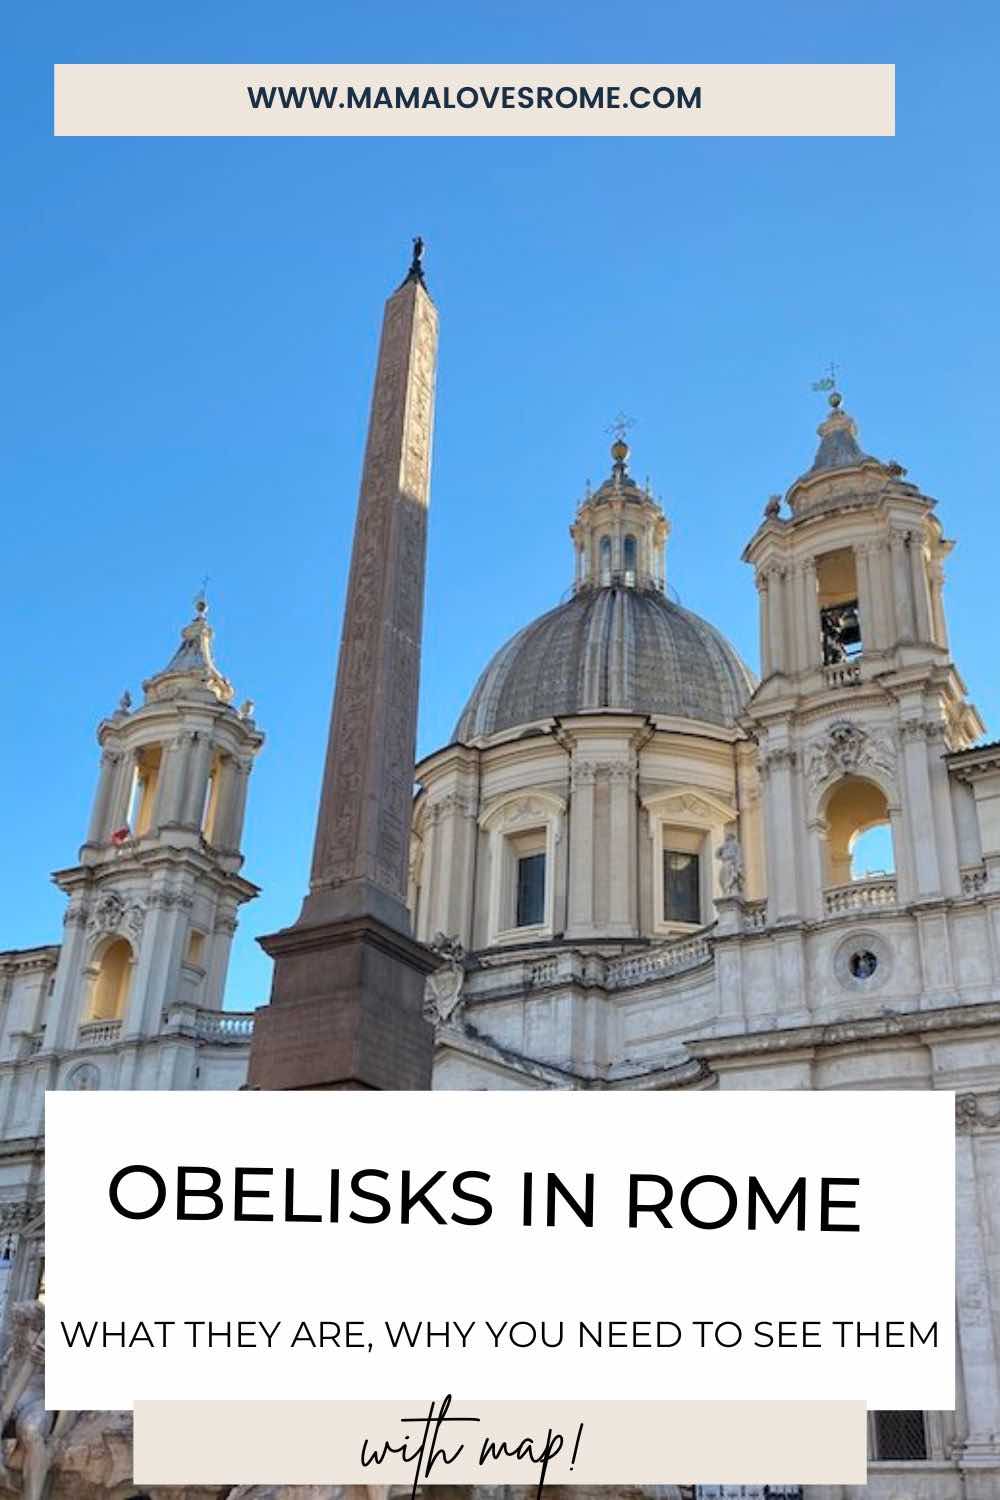 Image of Obelisk in Rome PIazza Navona with text: 'Obelisks in Rome: what they are + why you need to see them - with map'